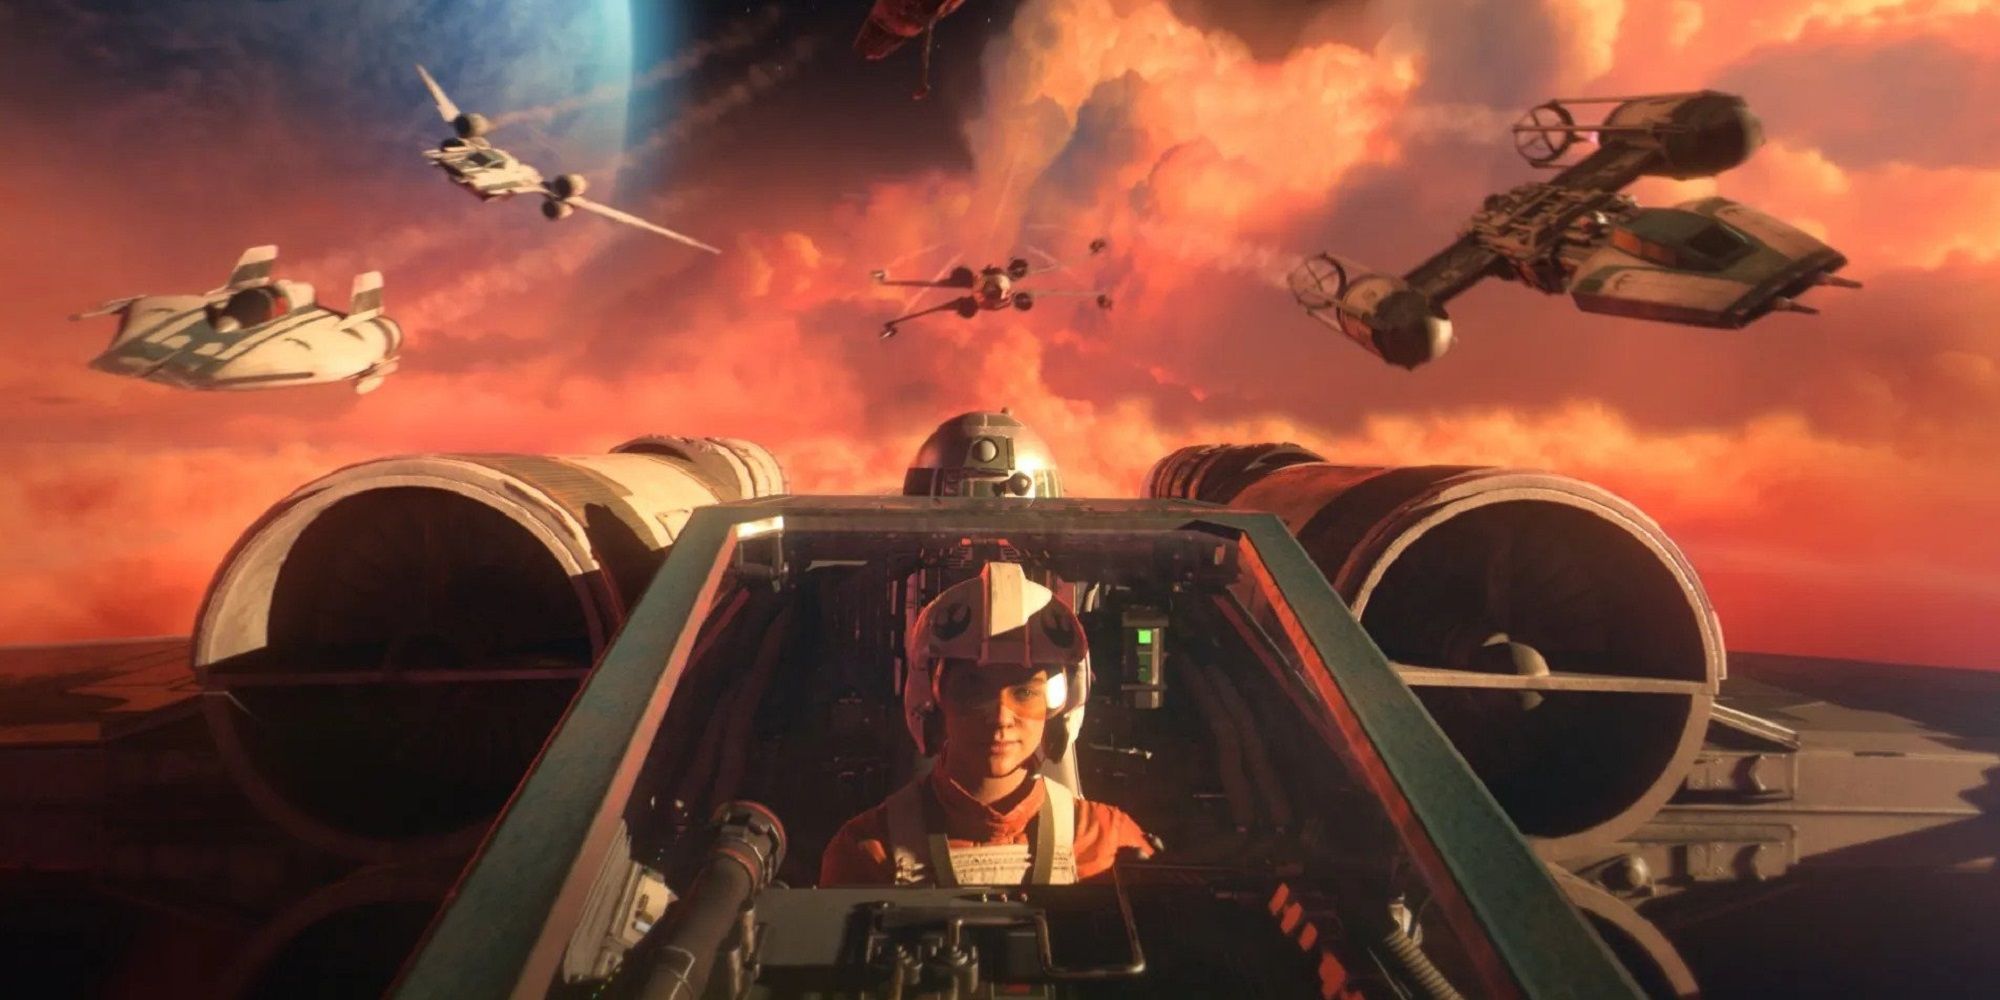 Star Wars Zoom Of Rebel In Cockpit, Y-Wing To The Right, Two Other Ships On the Left